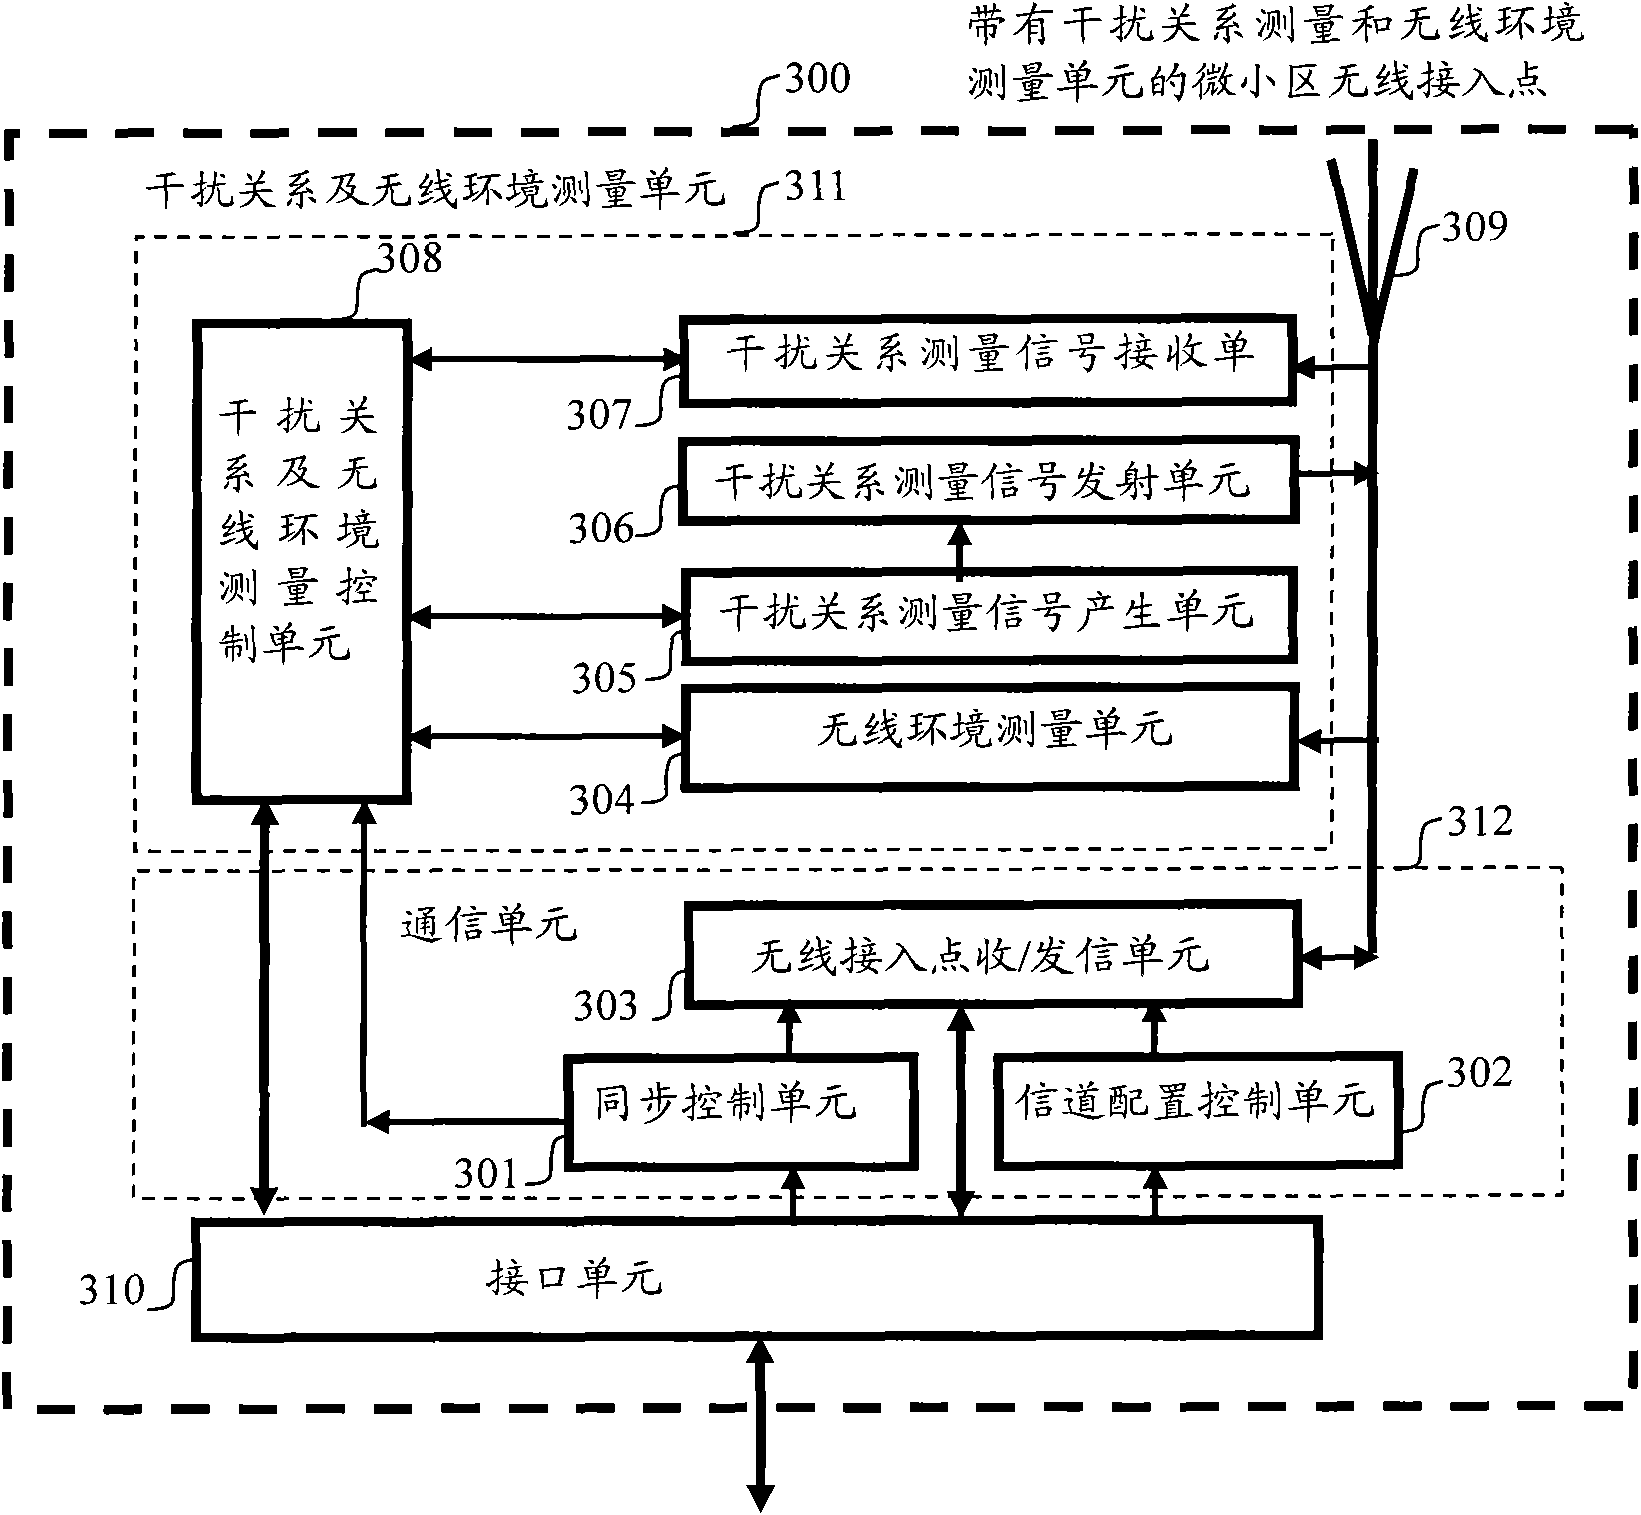 Microcell wireless access point, channel configuration method thereof, and frequency spectrum resource management system thereof